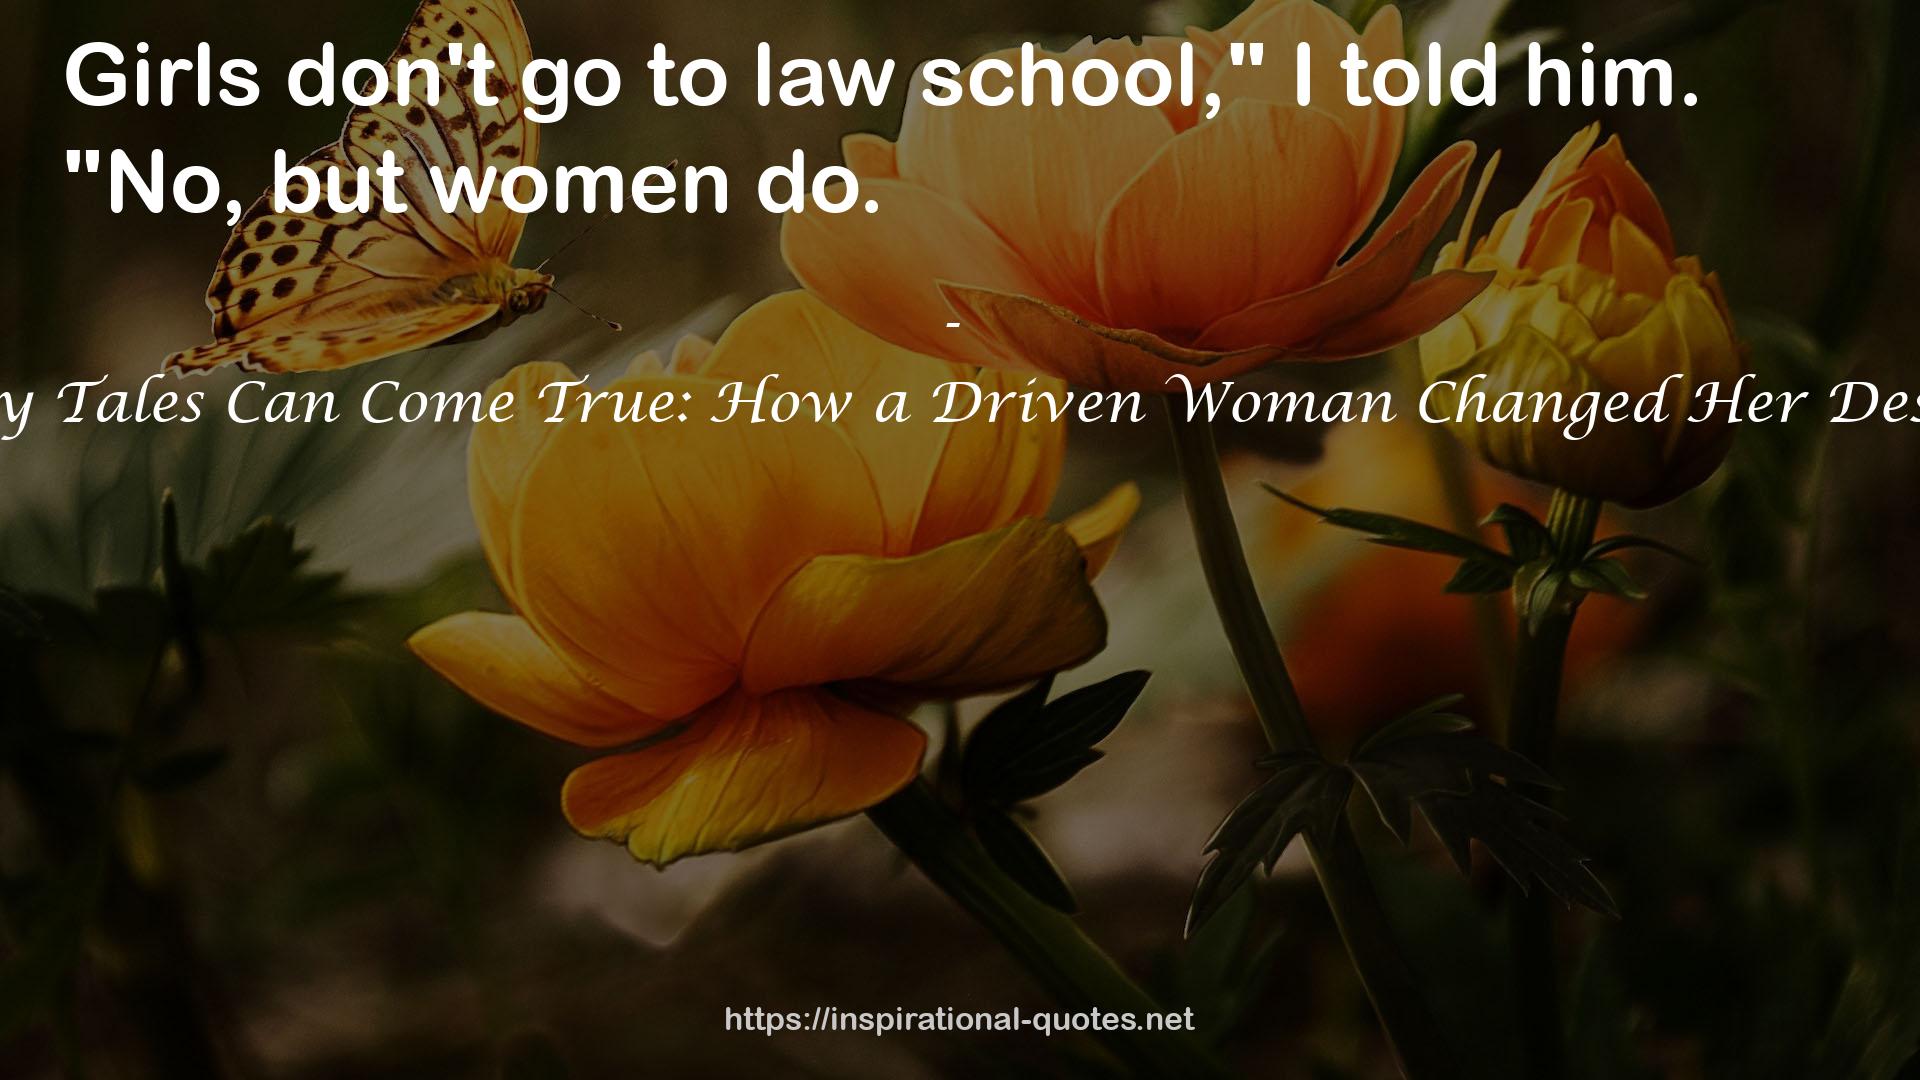 Fairy Tales Can Come True: How a Driven Woman Changed Her Destiny QUOTES